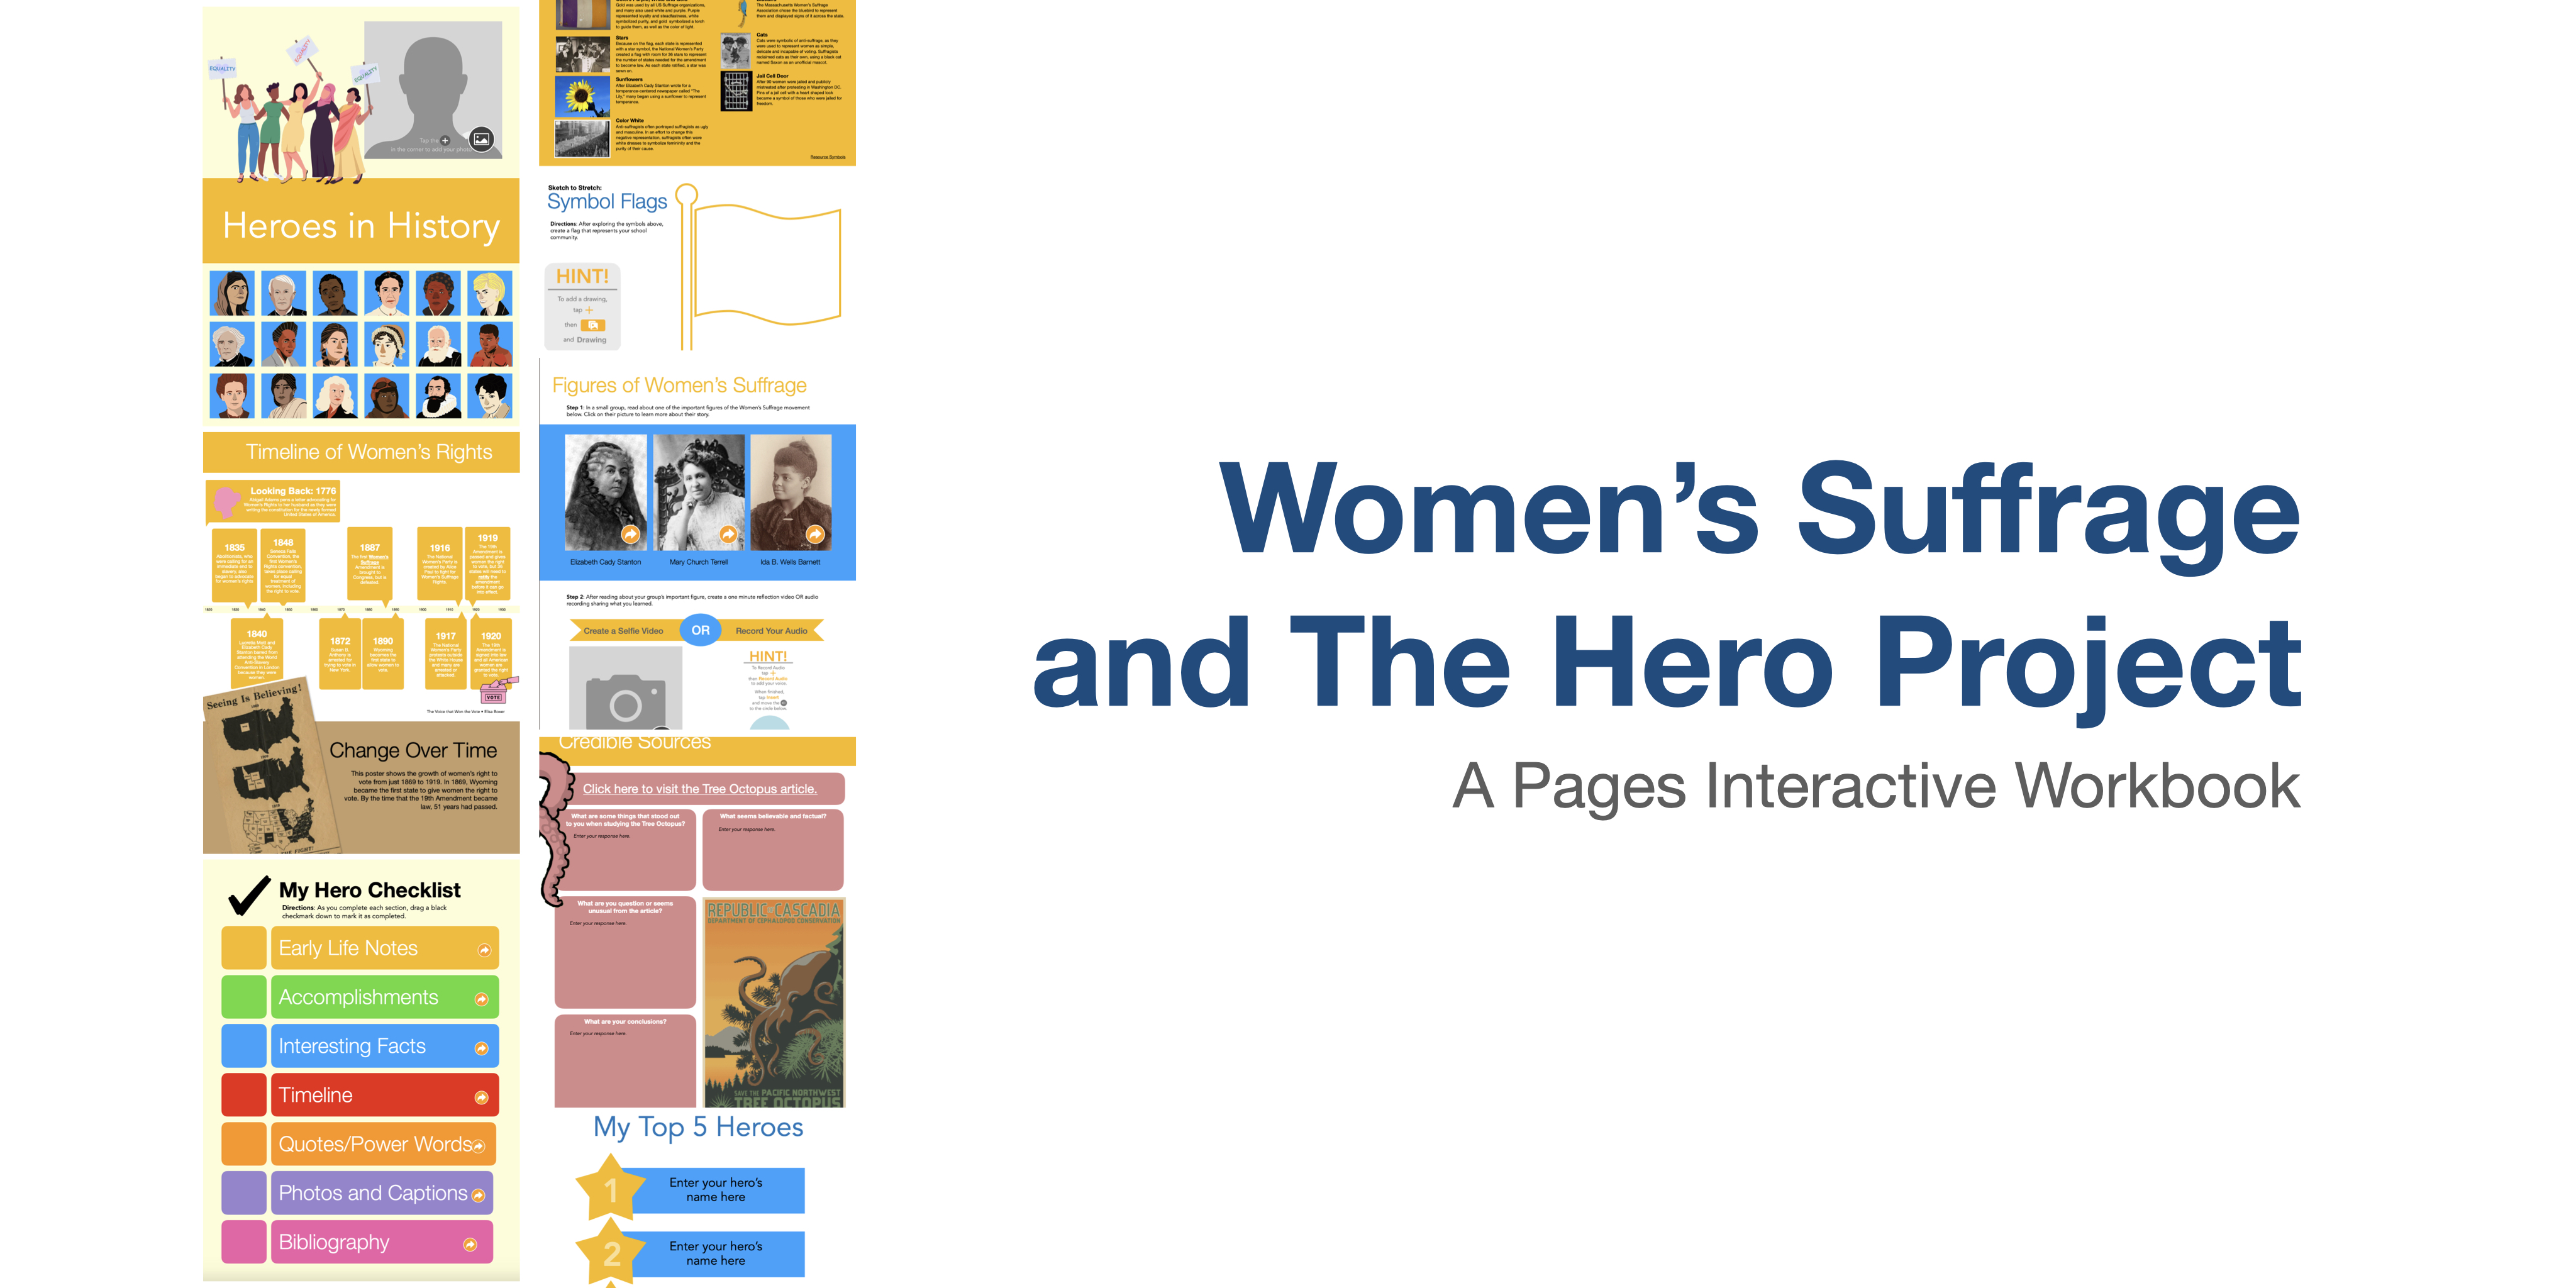 Image contains preview thumbnails of the pages in the Heroes in History interactive workbook.